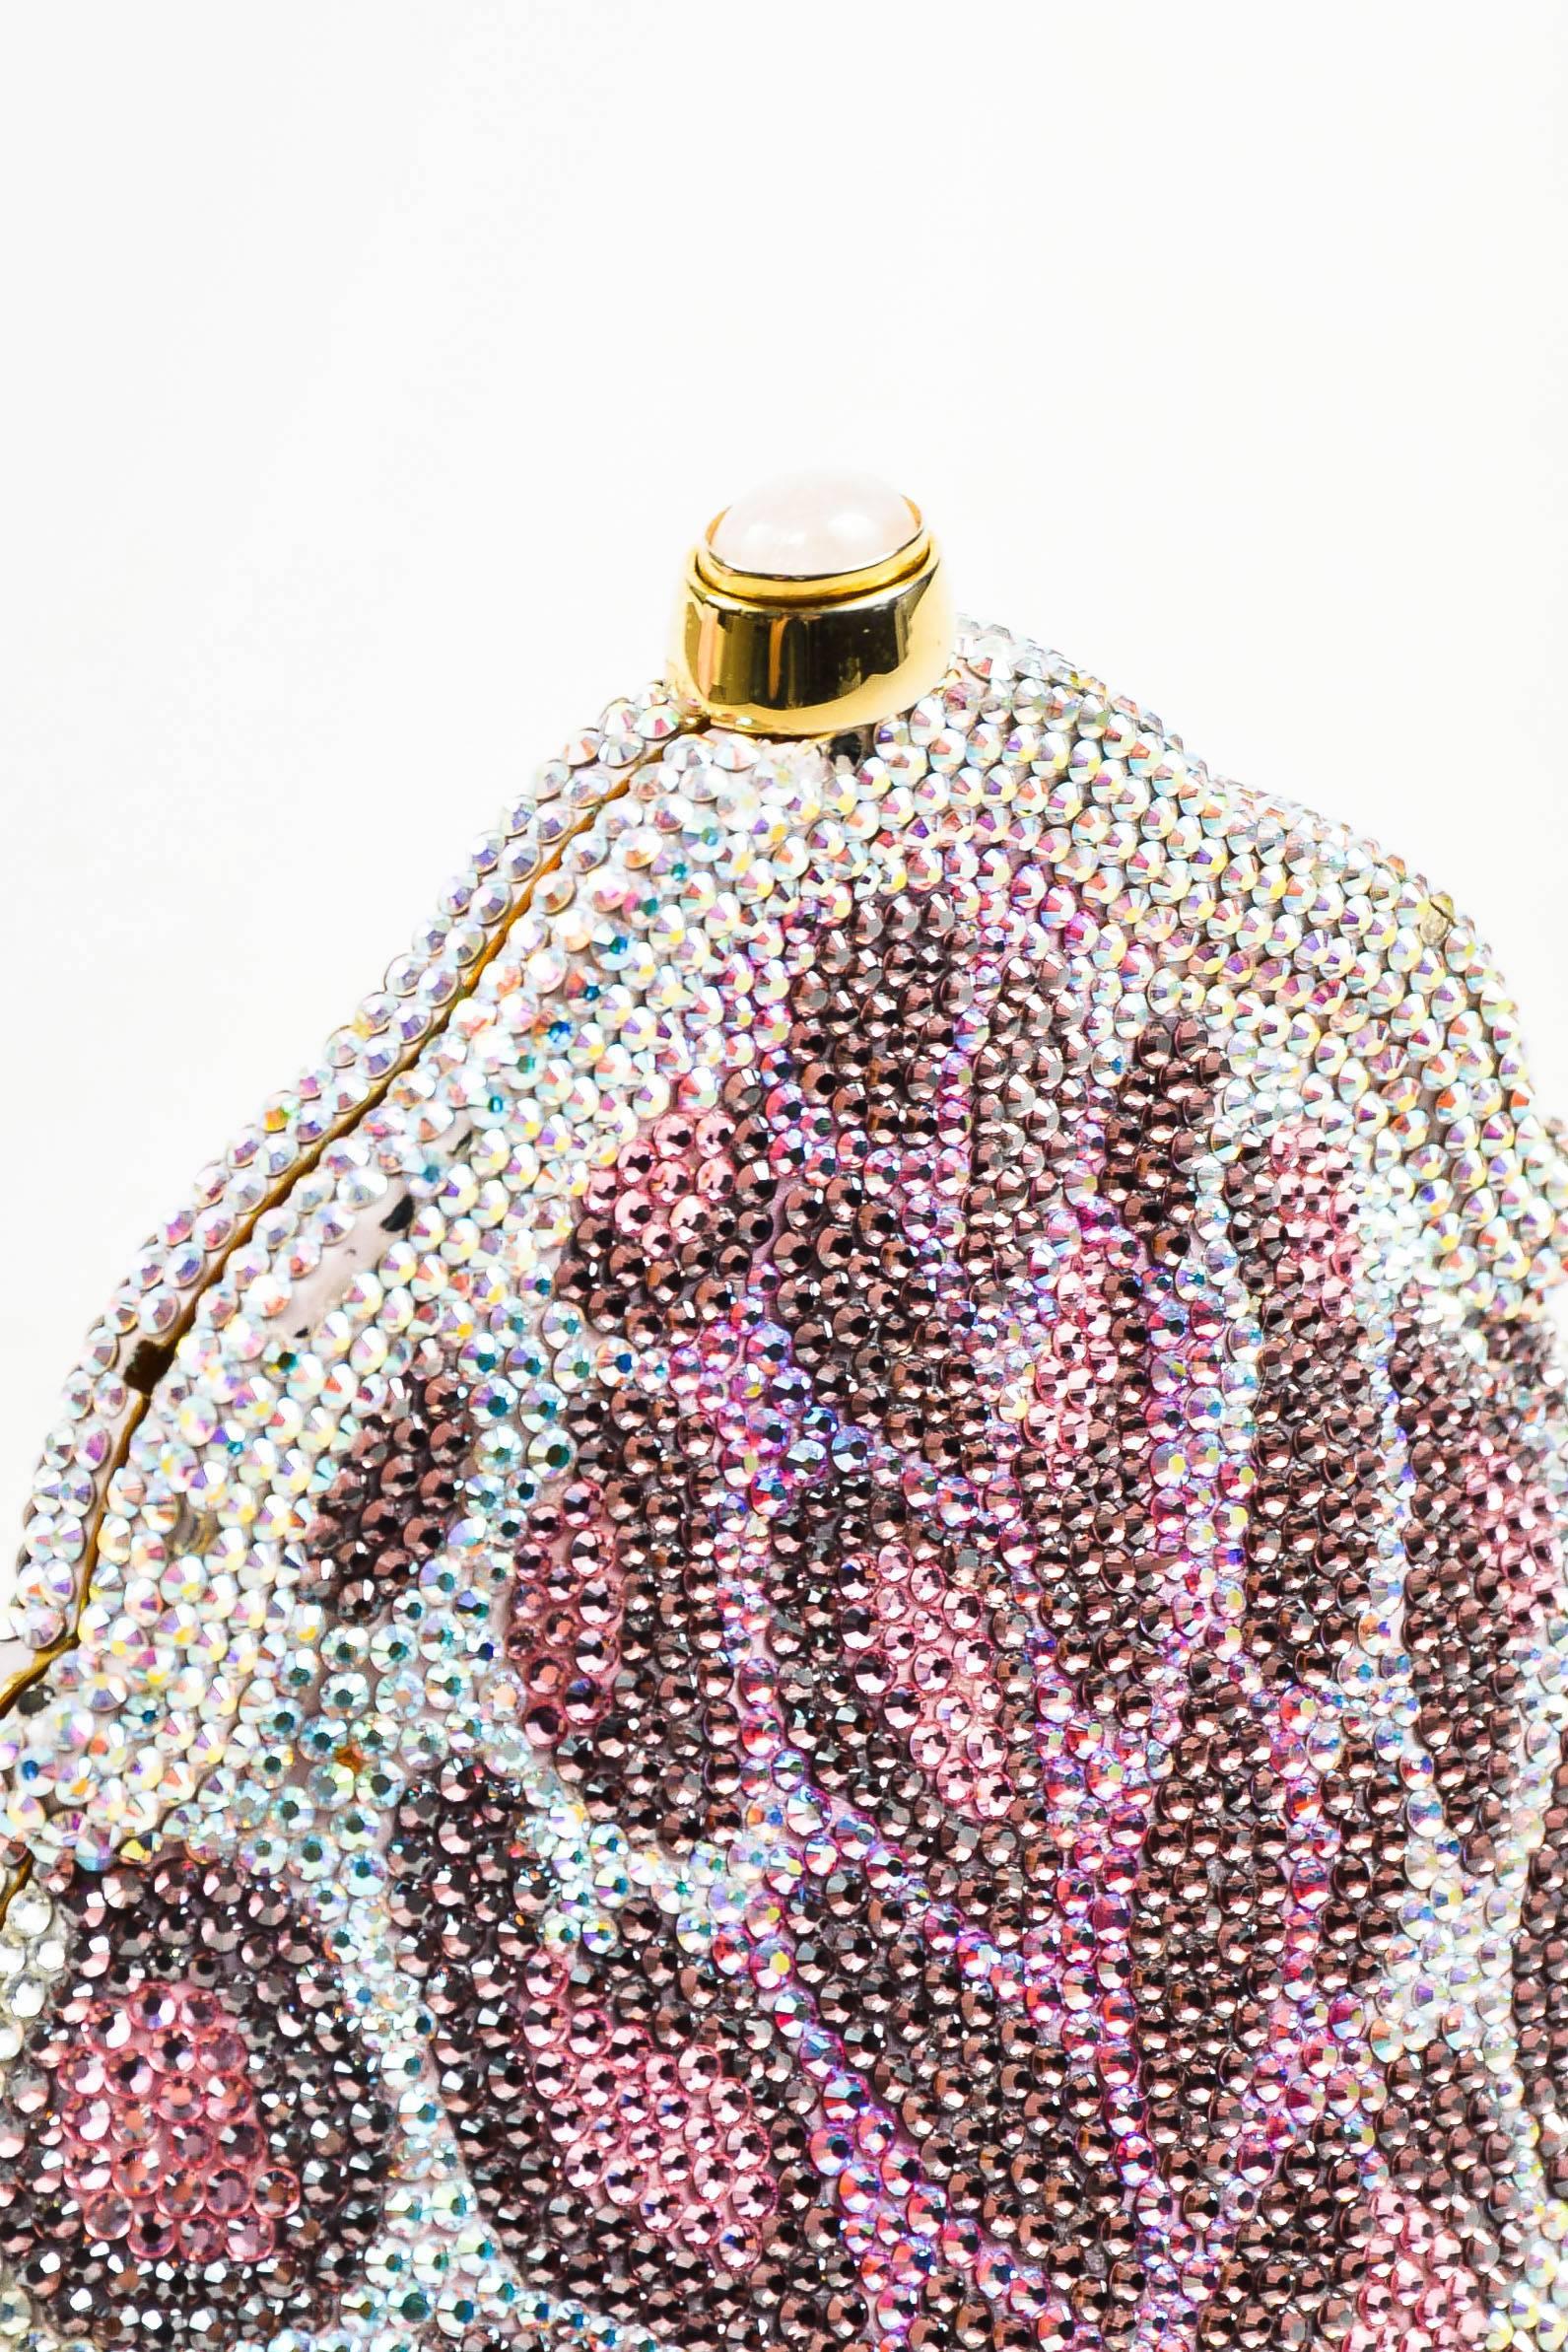 Eye-catching bag by Judith Leiber in a pink, purple, and clear rhinestone design. Leopard print with a curved shape. A great conversation piece for your next event. Frame style with hard sides and a top push lock closure. Chain folds out so the bag